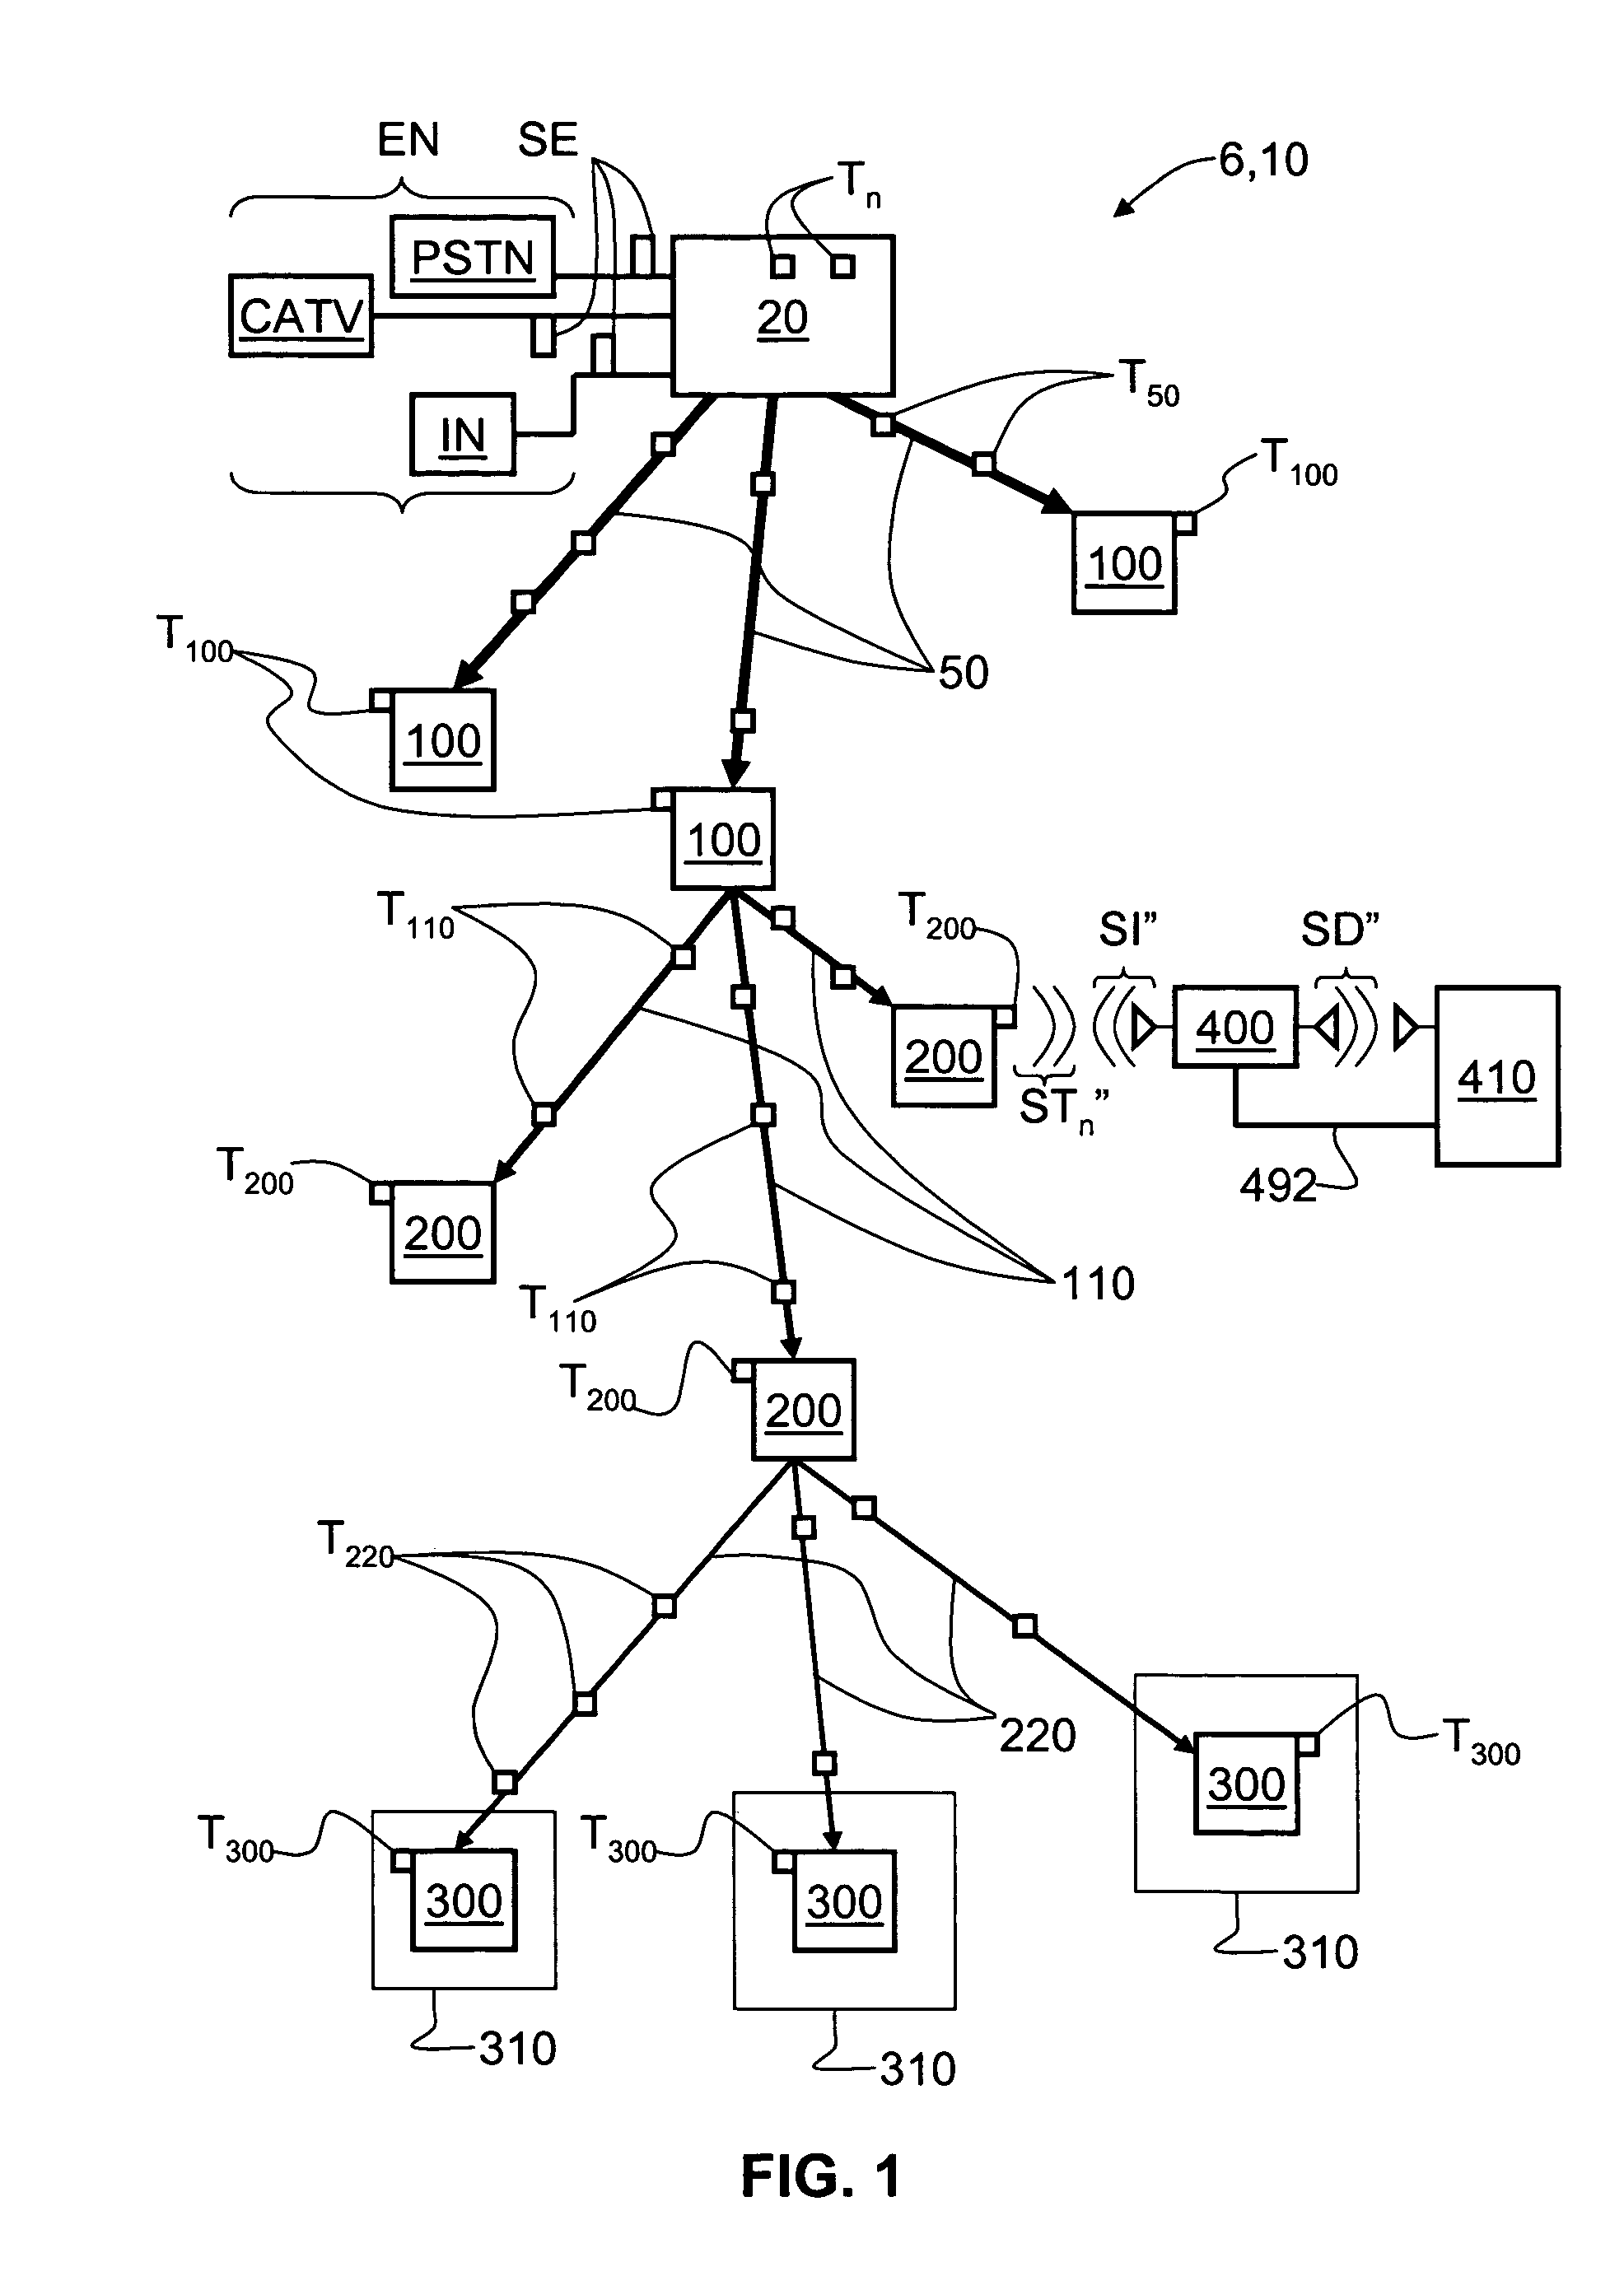 RFID systems and methods for optical fiber network deployment and maintenance